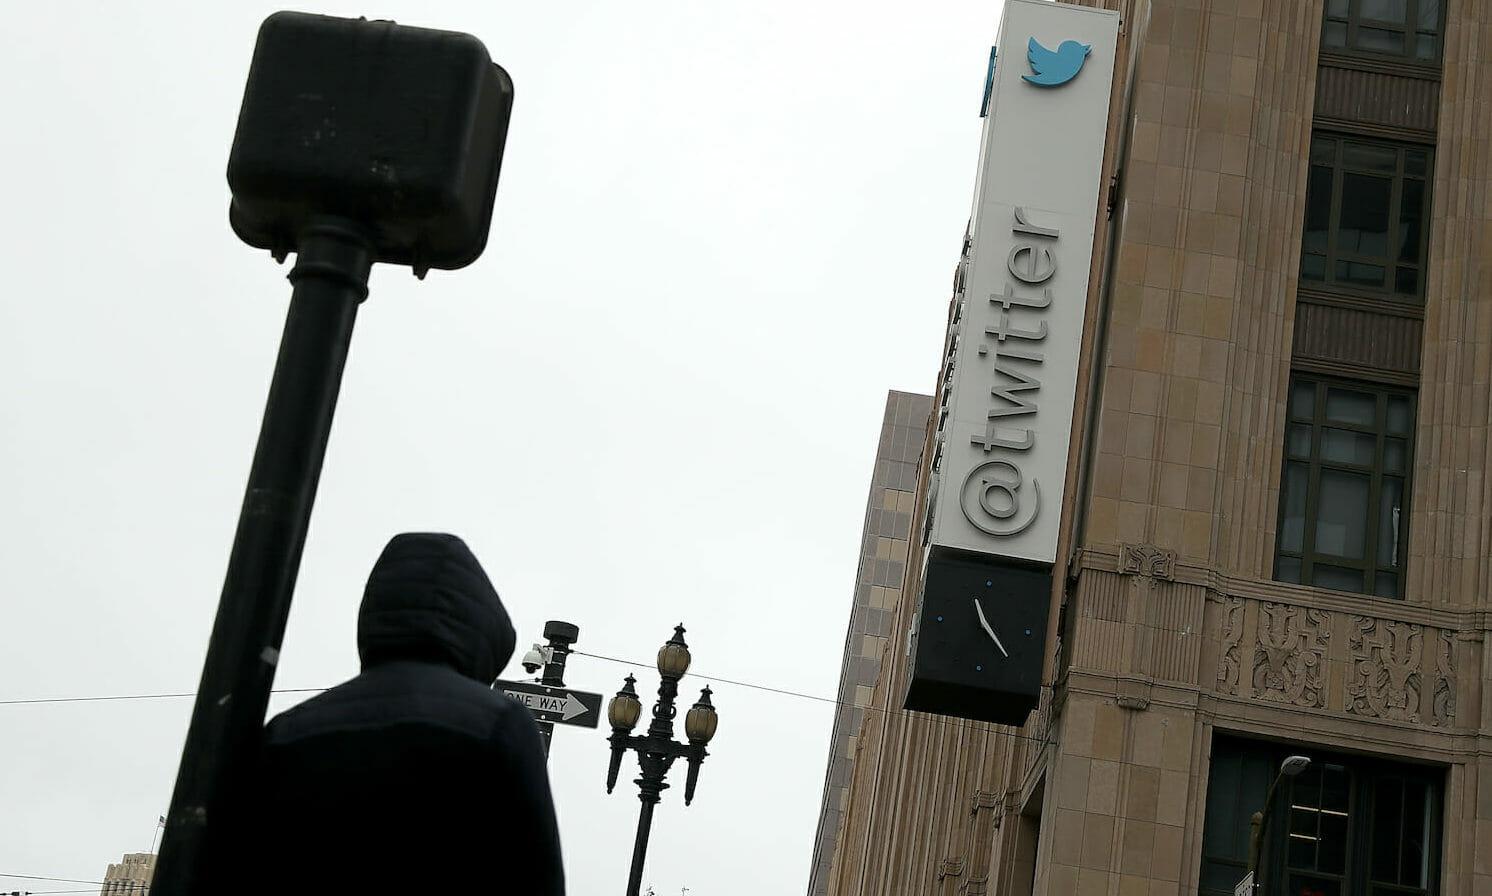 A sign is posted on the exterior of Twitter headquarters in San Francisco, California. The company warned developers that a bug may have exposed their APIs and tokens. (Justin Sullivan/Getty Images)